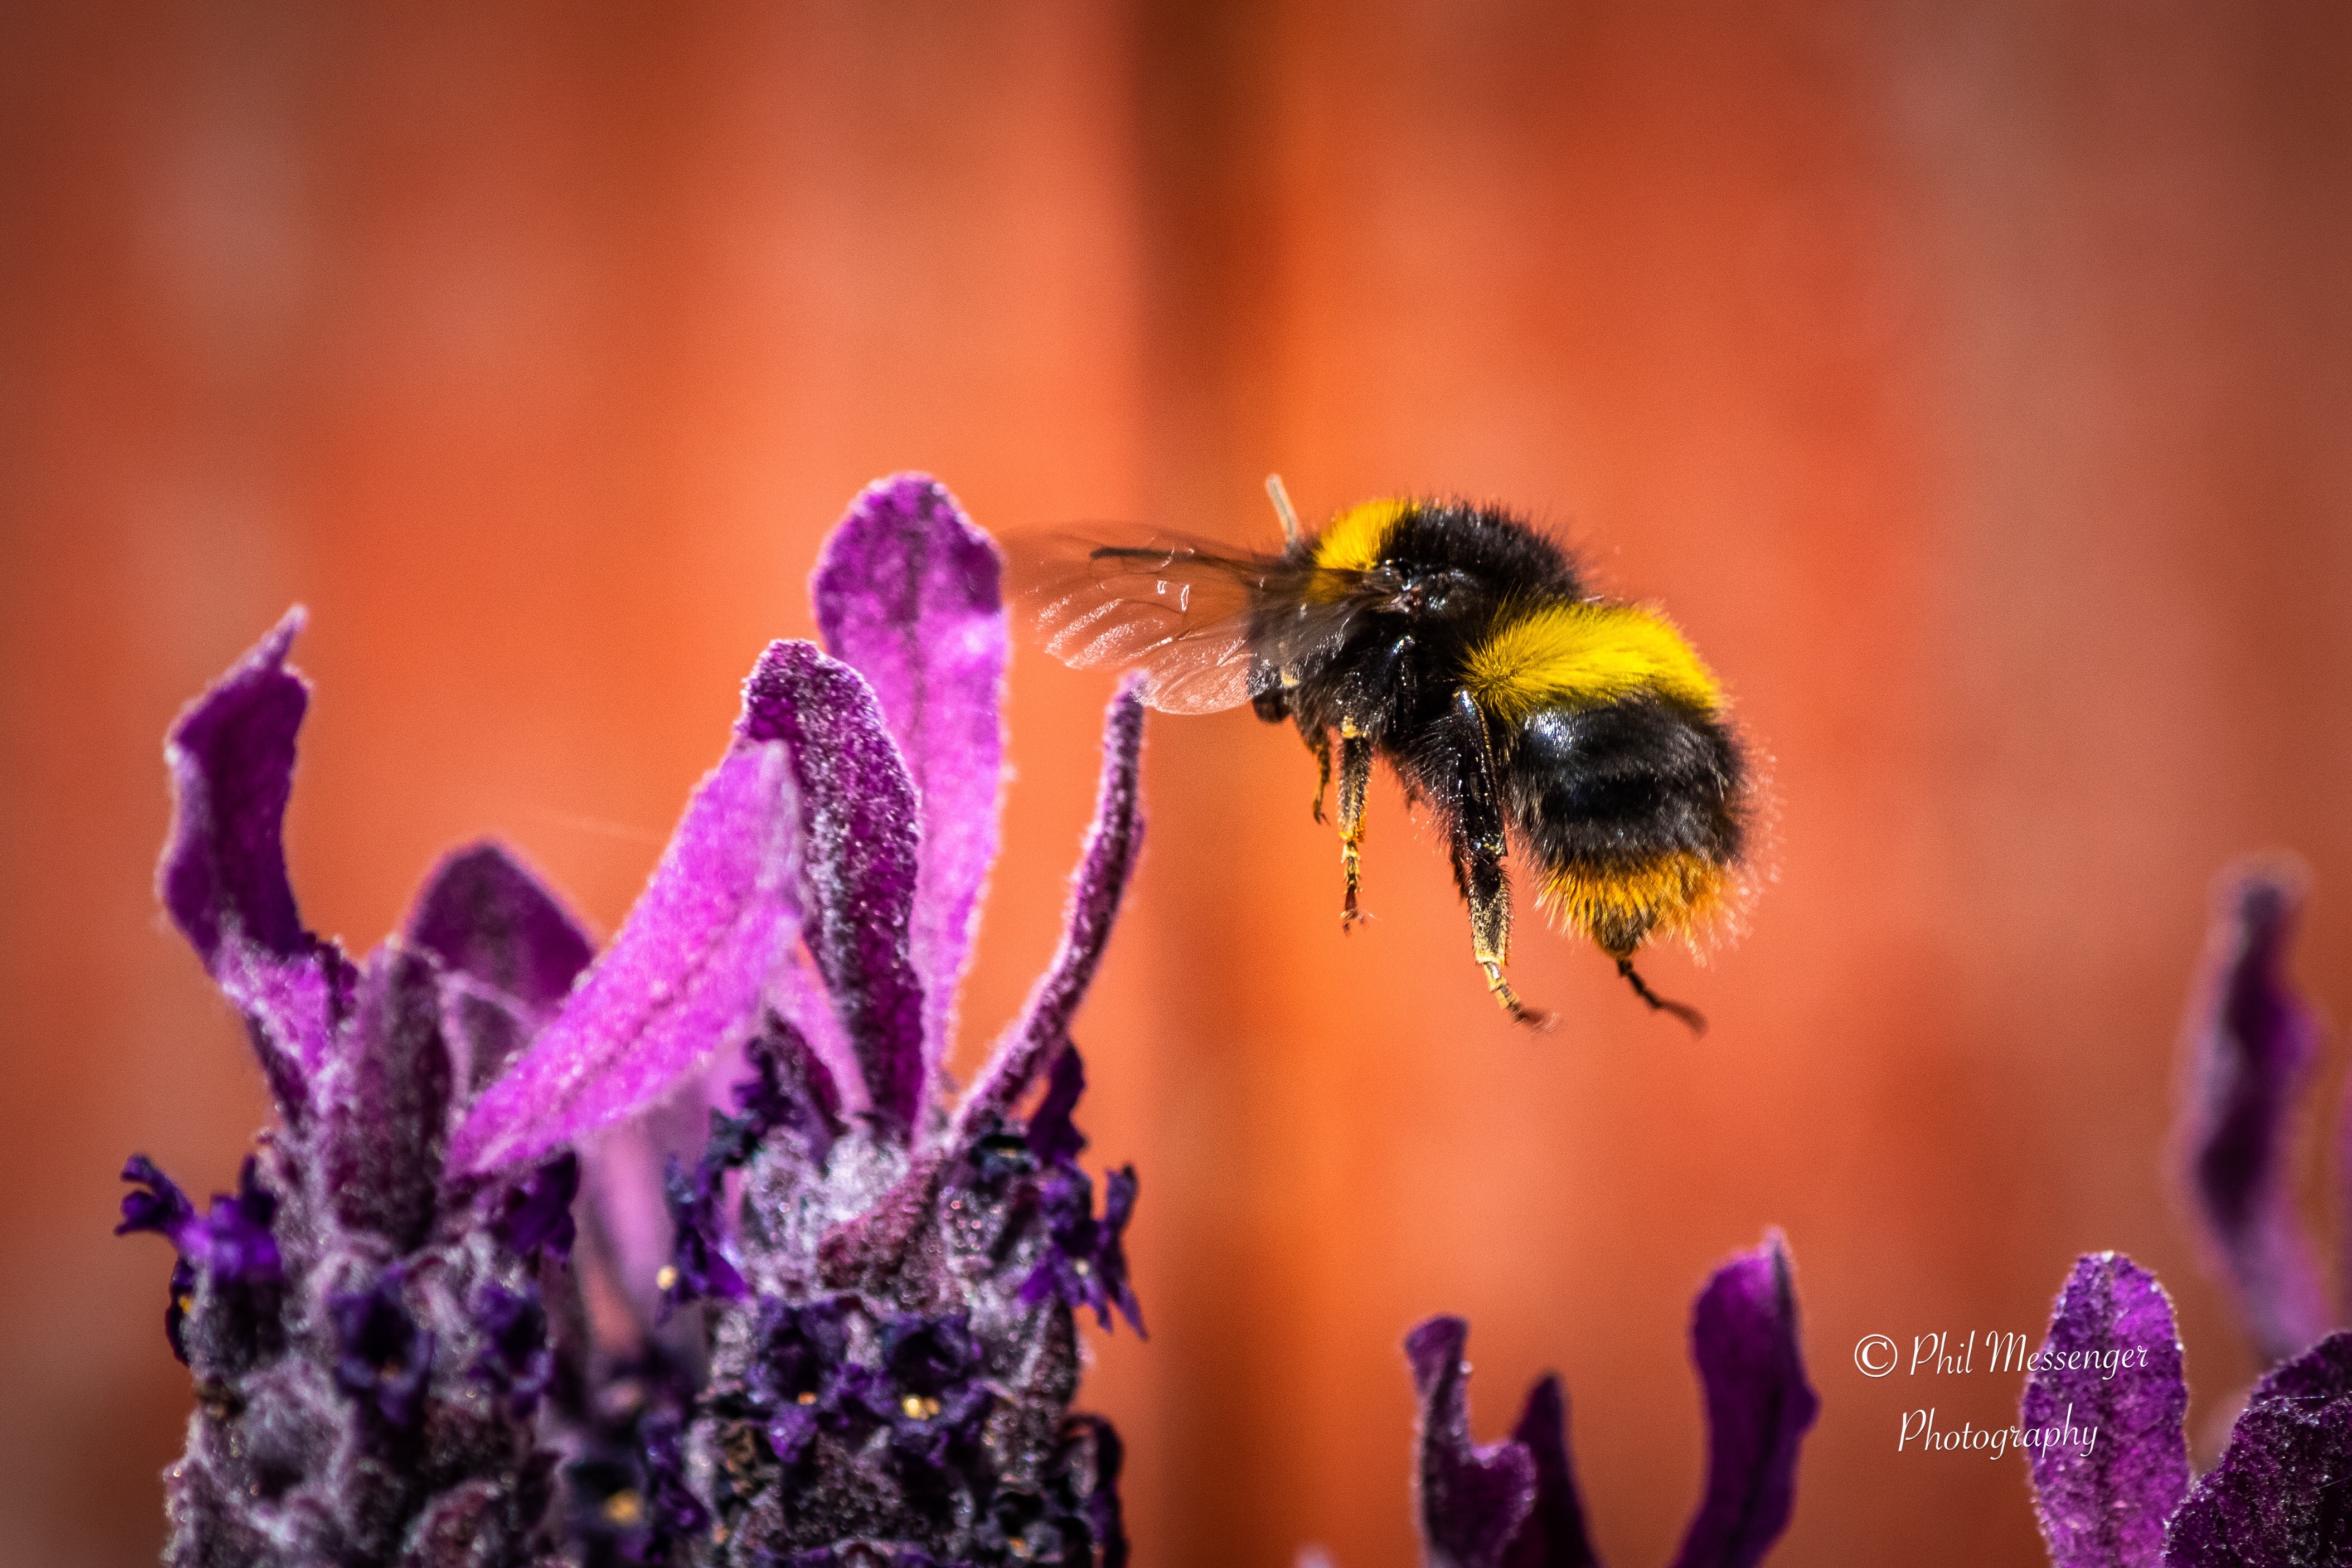 Busy bumble bee in the garden